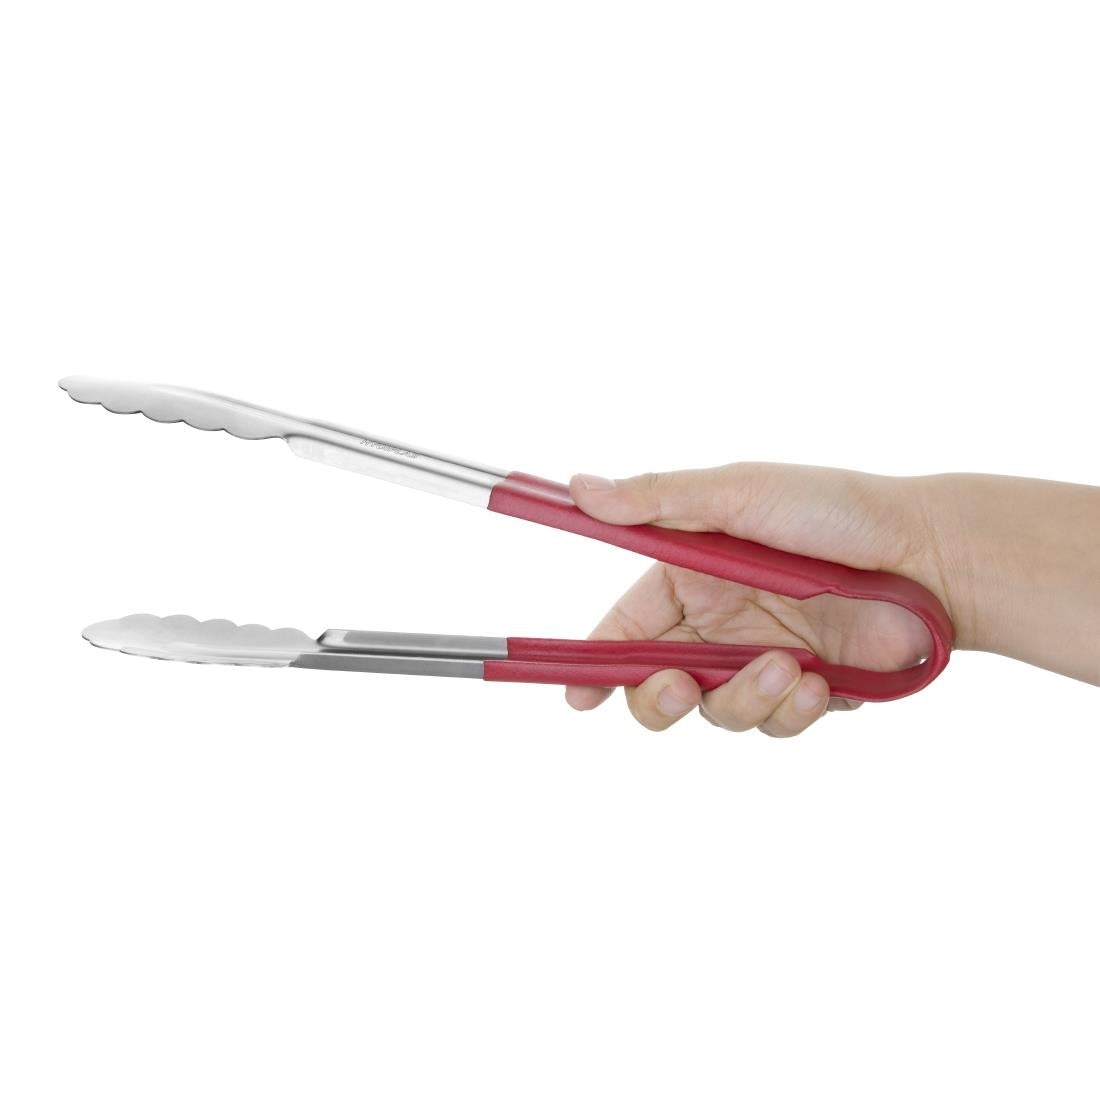 CB154 Vogue Colour Coded Red Serving Tongs 11"